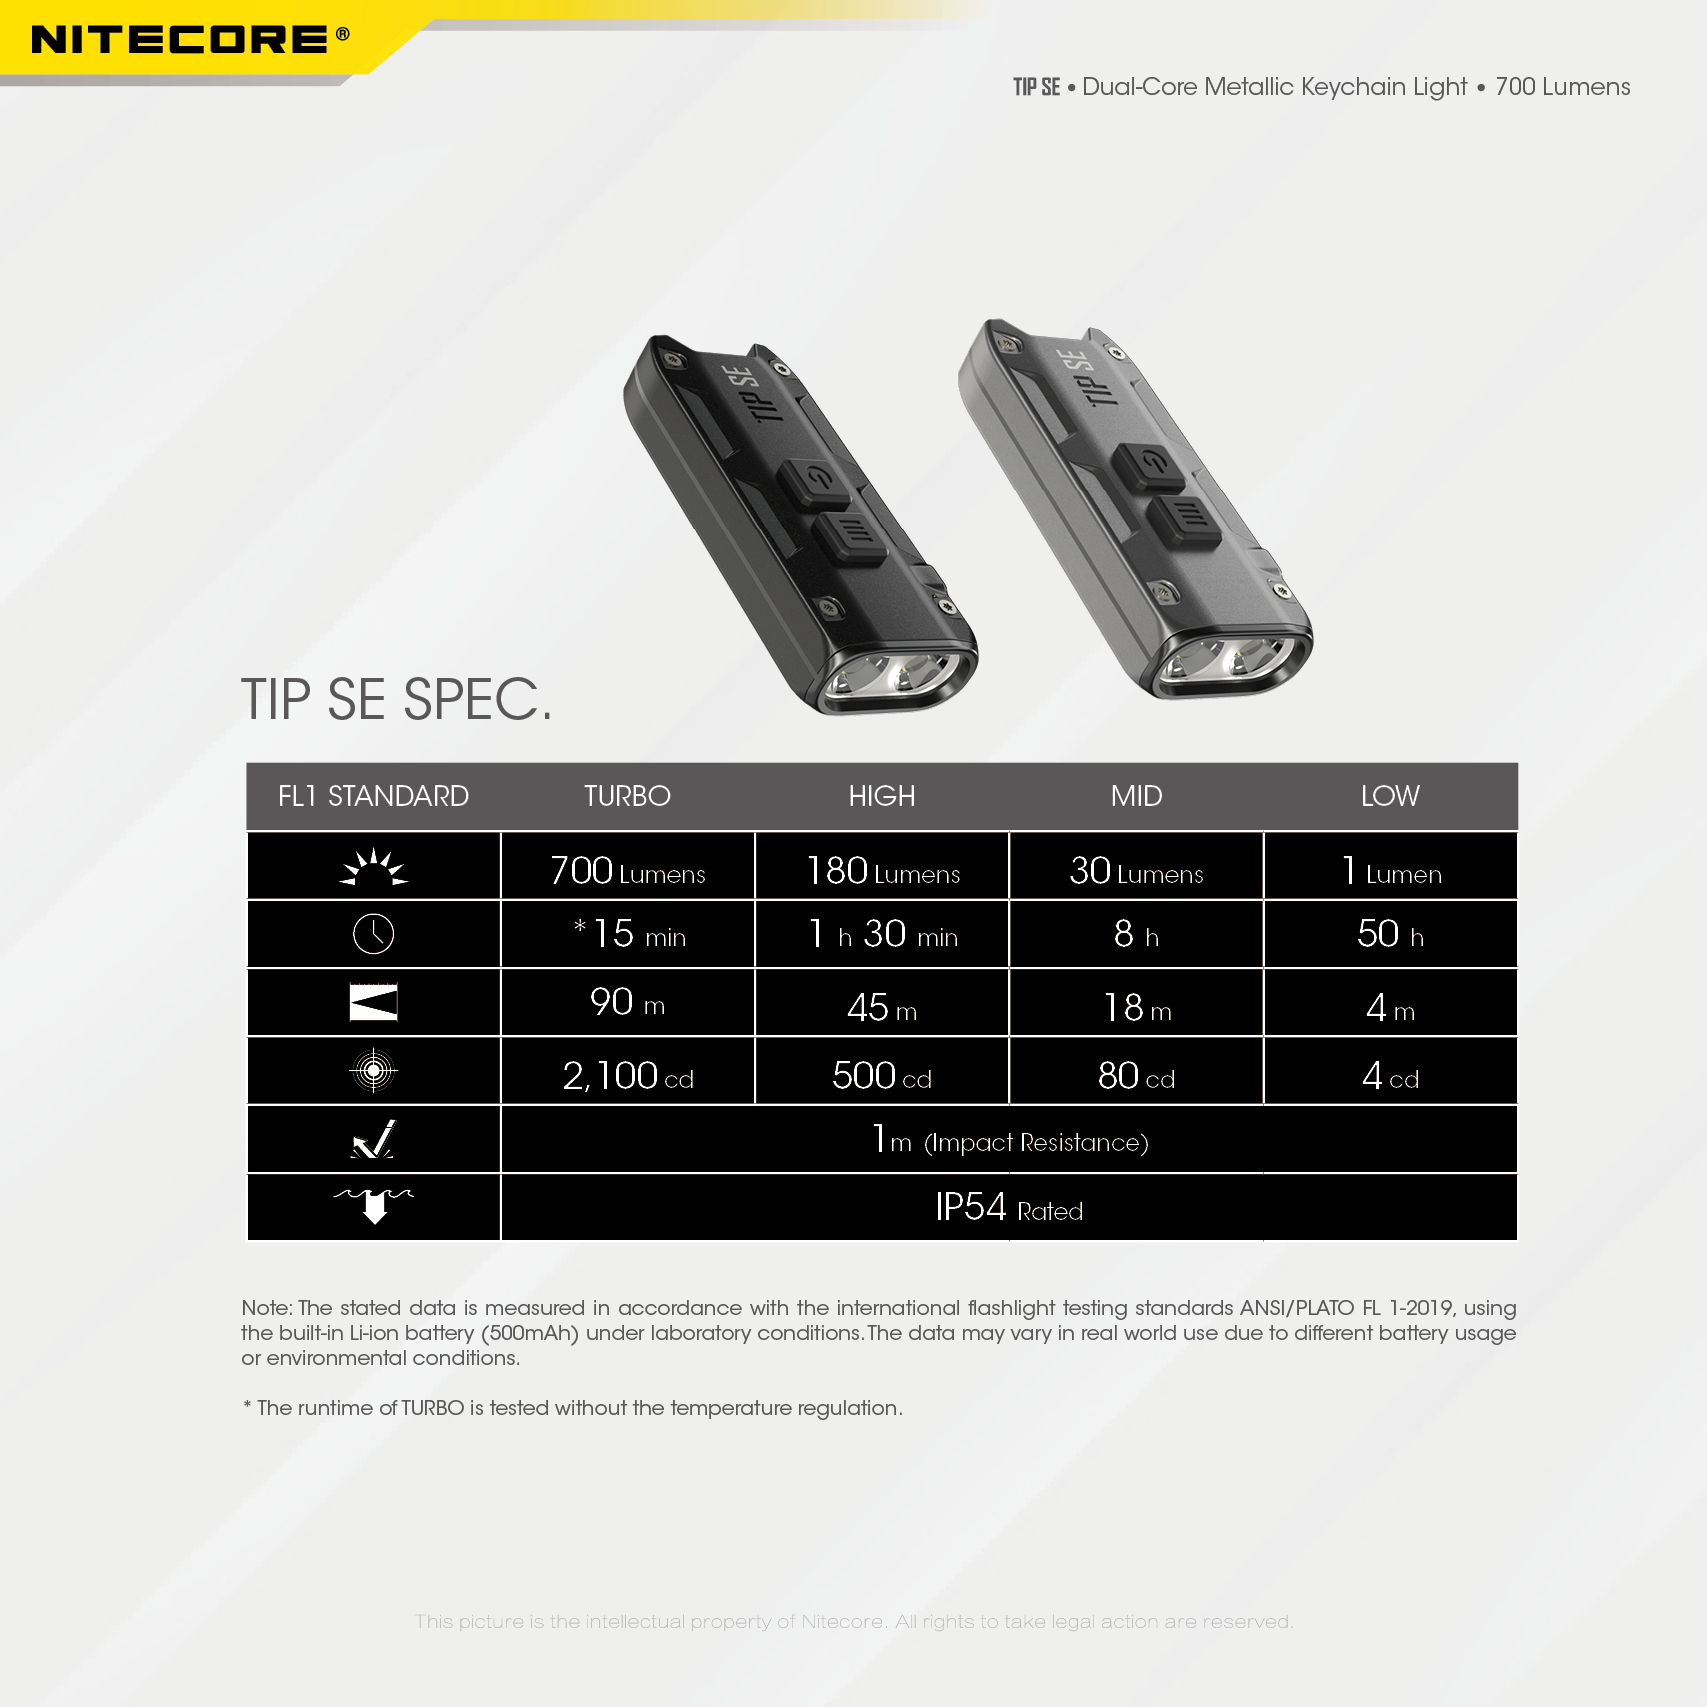 NITECORE TIP SE 700LM P8 Dual Light LED Keychain Flashlight Type-C Rechargeable QC Every Day Carry Mini Torch